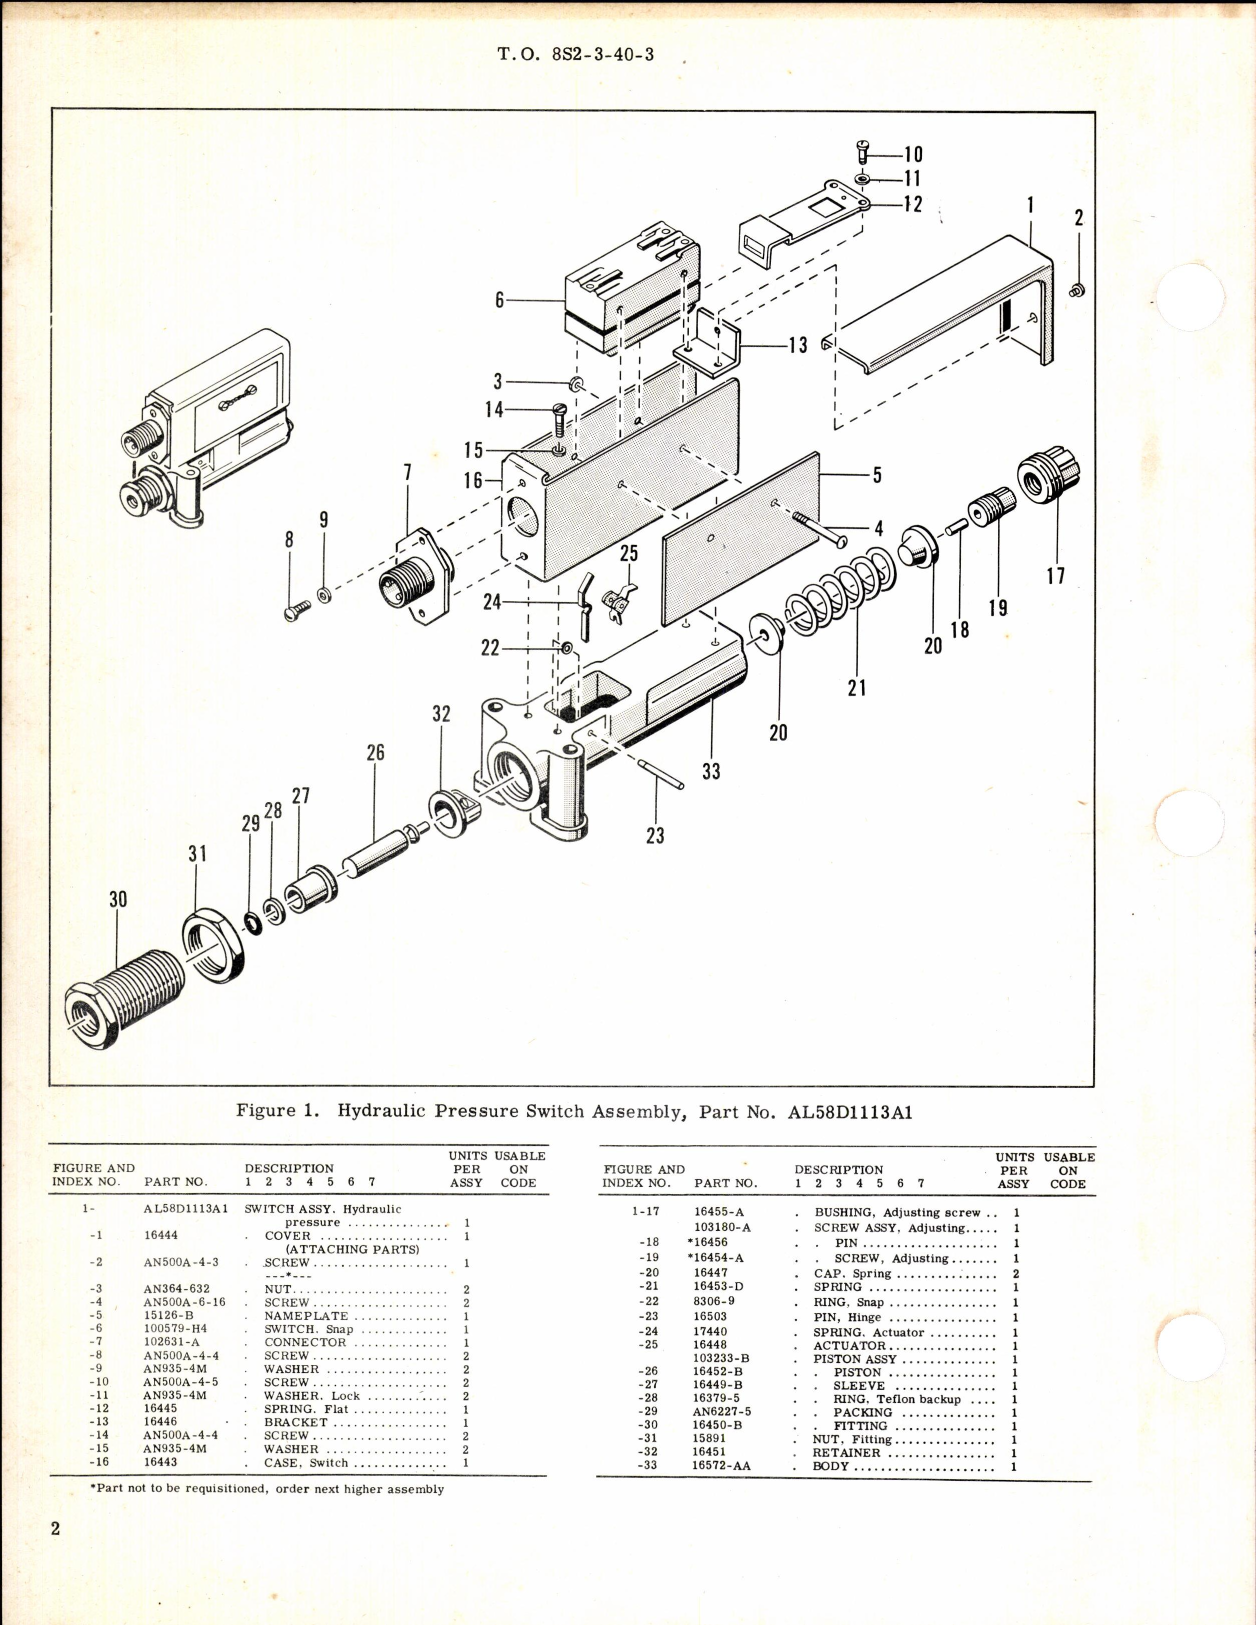 Sample page 2 from AirCorps Library document: Hydraulic Pressure Switch Part No AL-58D1113A1